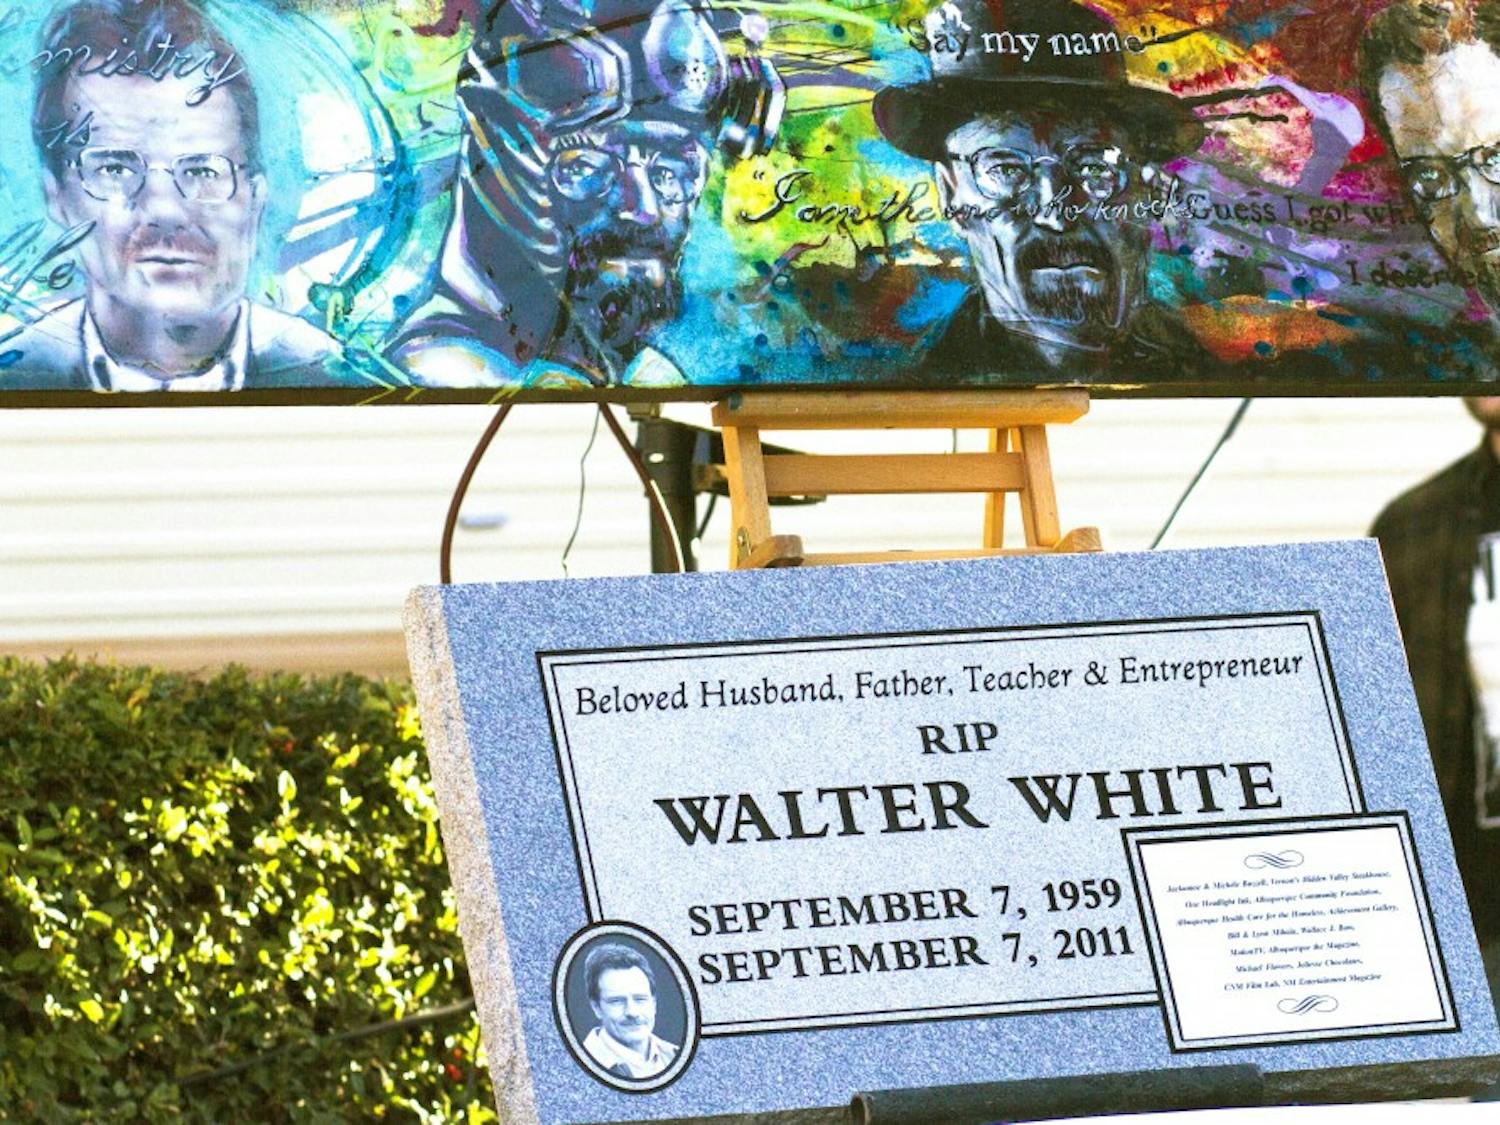 	Walter White’s headstone: Once fans have finished the tour, they can make their way to Vernon’s Hidden Valley Steakhouse at 6855 4th St. NW to pay their respects to Walter White’s headstone.